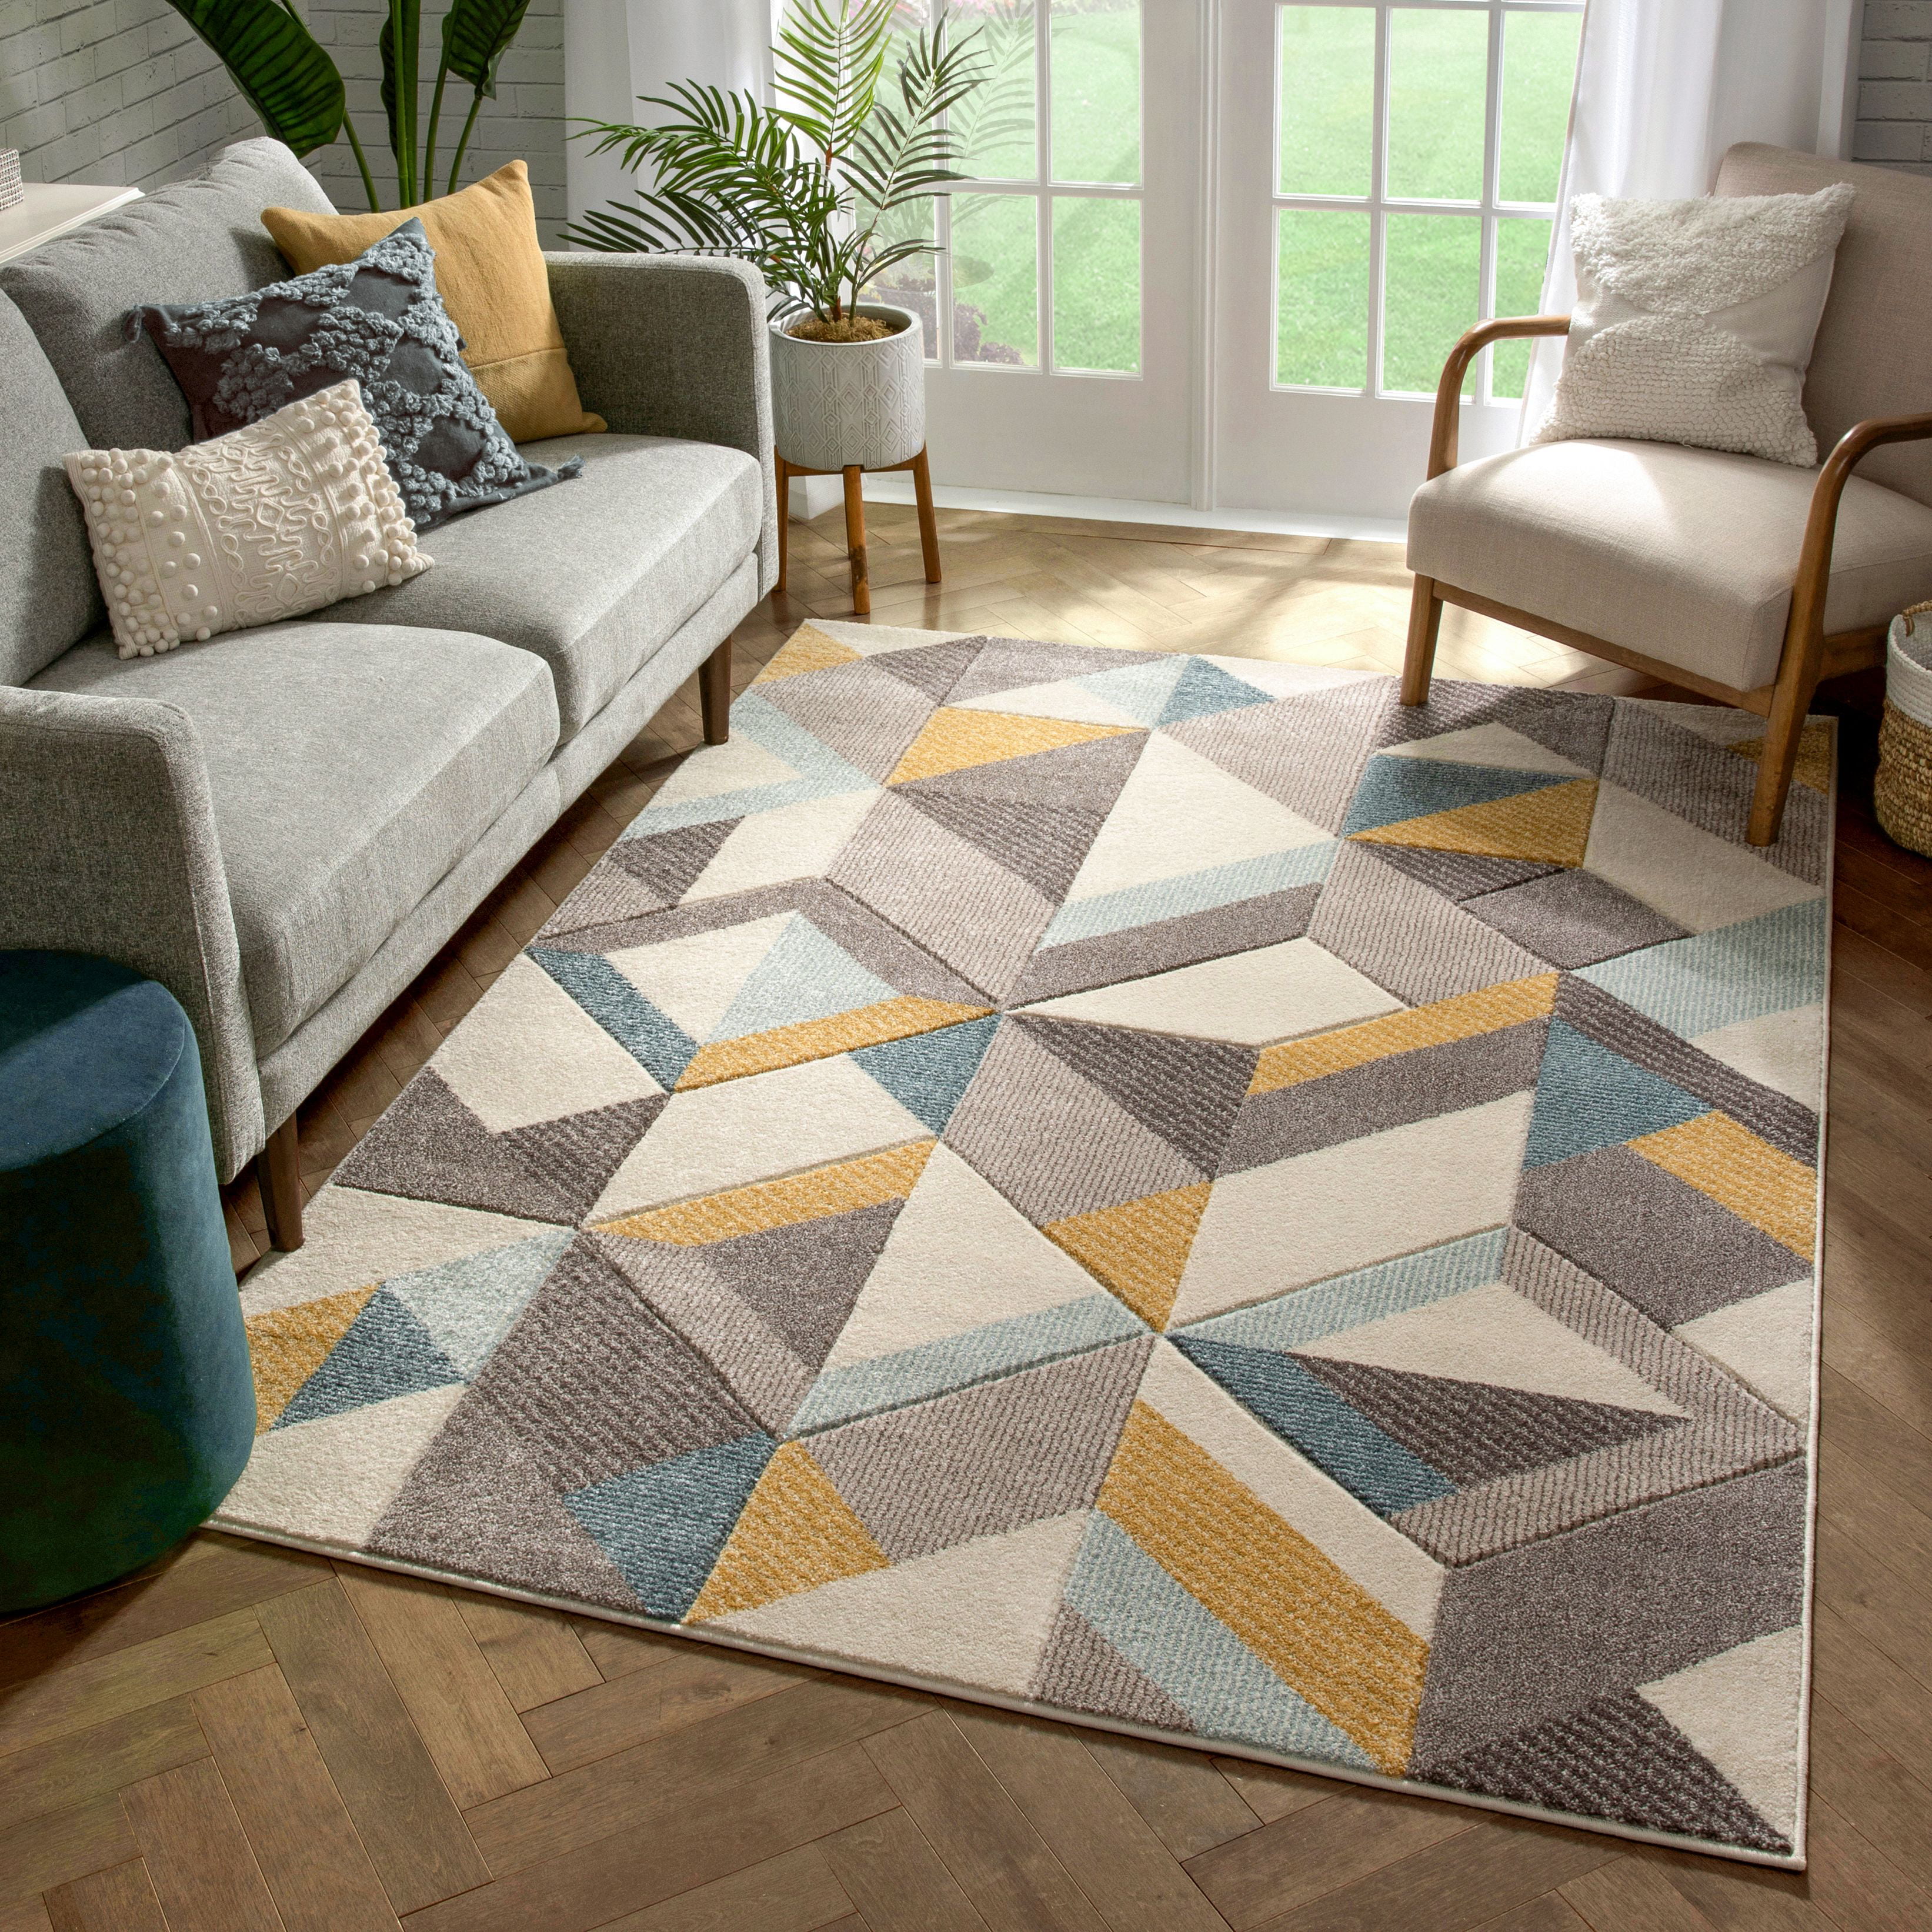 FH Home Outdoor Rug - Waterproof, Fade Resistant, Crease-Free - Premium  Recycled Plastic - Geometric - Patio, Porch, Deck, Balcony - Aztec - Yellow  